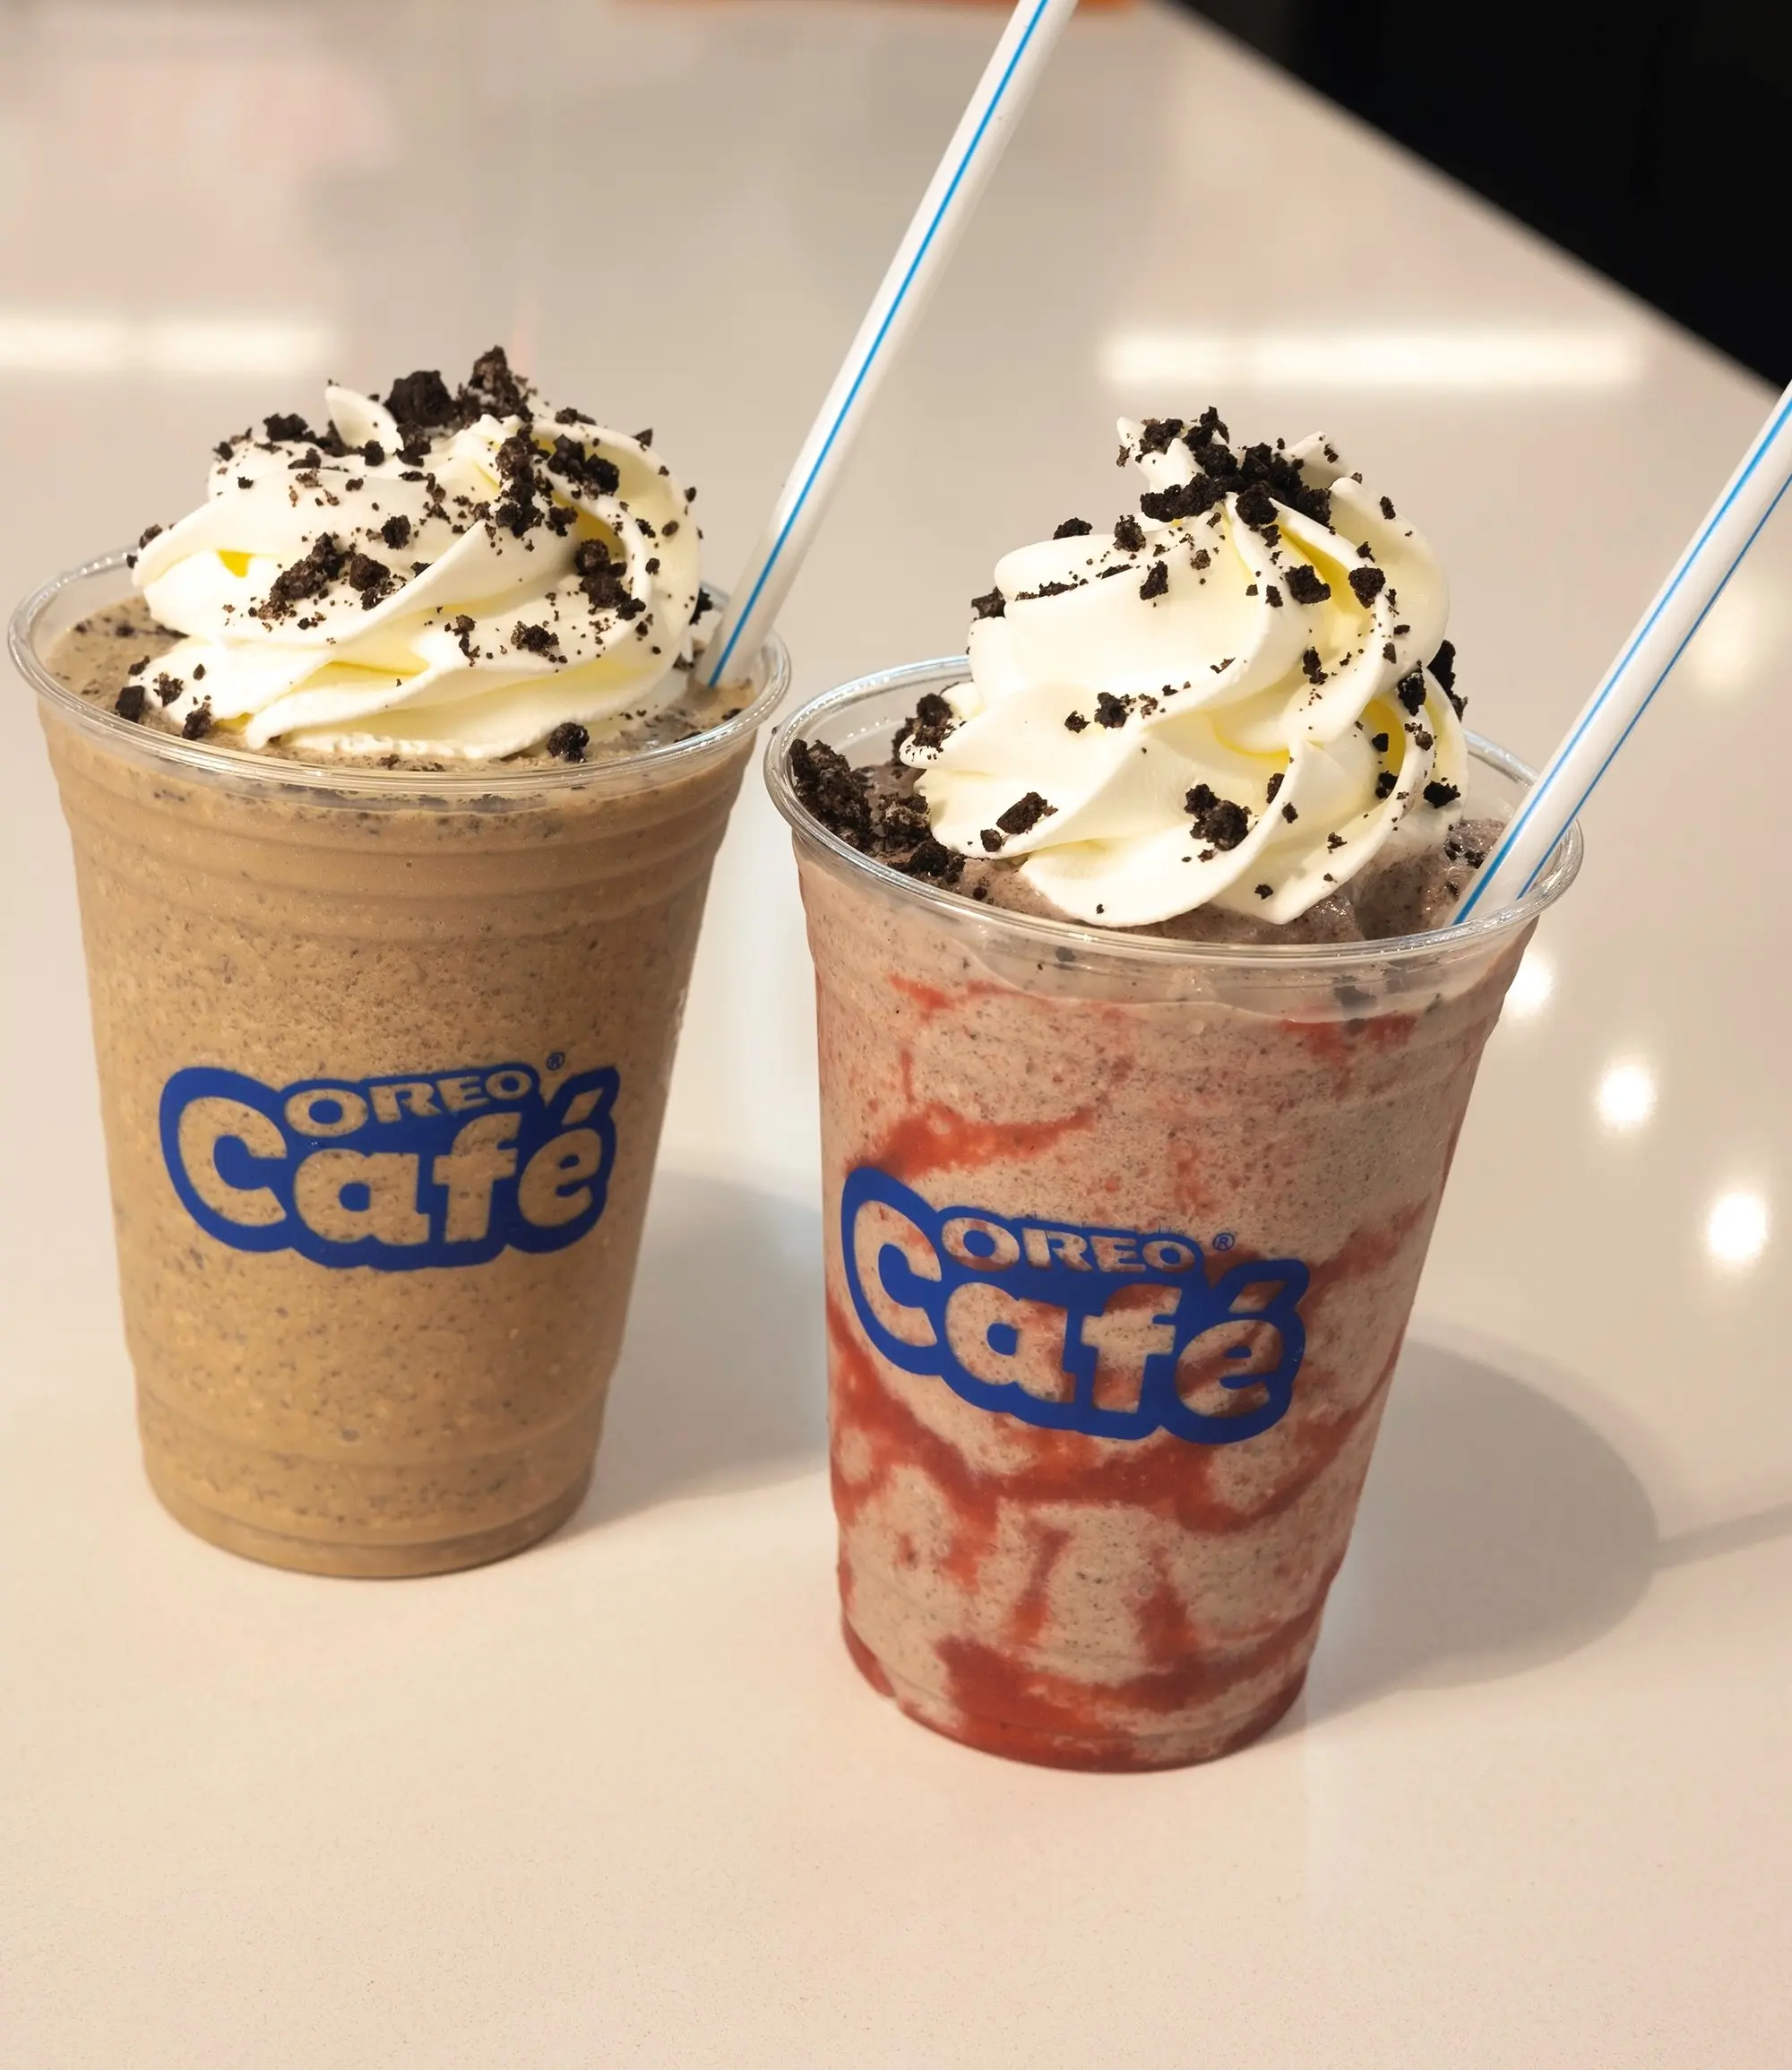 BRAND NEW] Oreo Café Launches Inside the American Dream Mall •  YeahThatsKosher